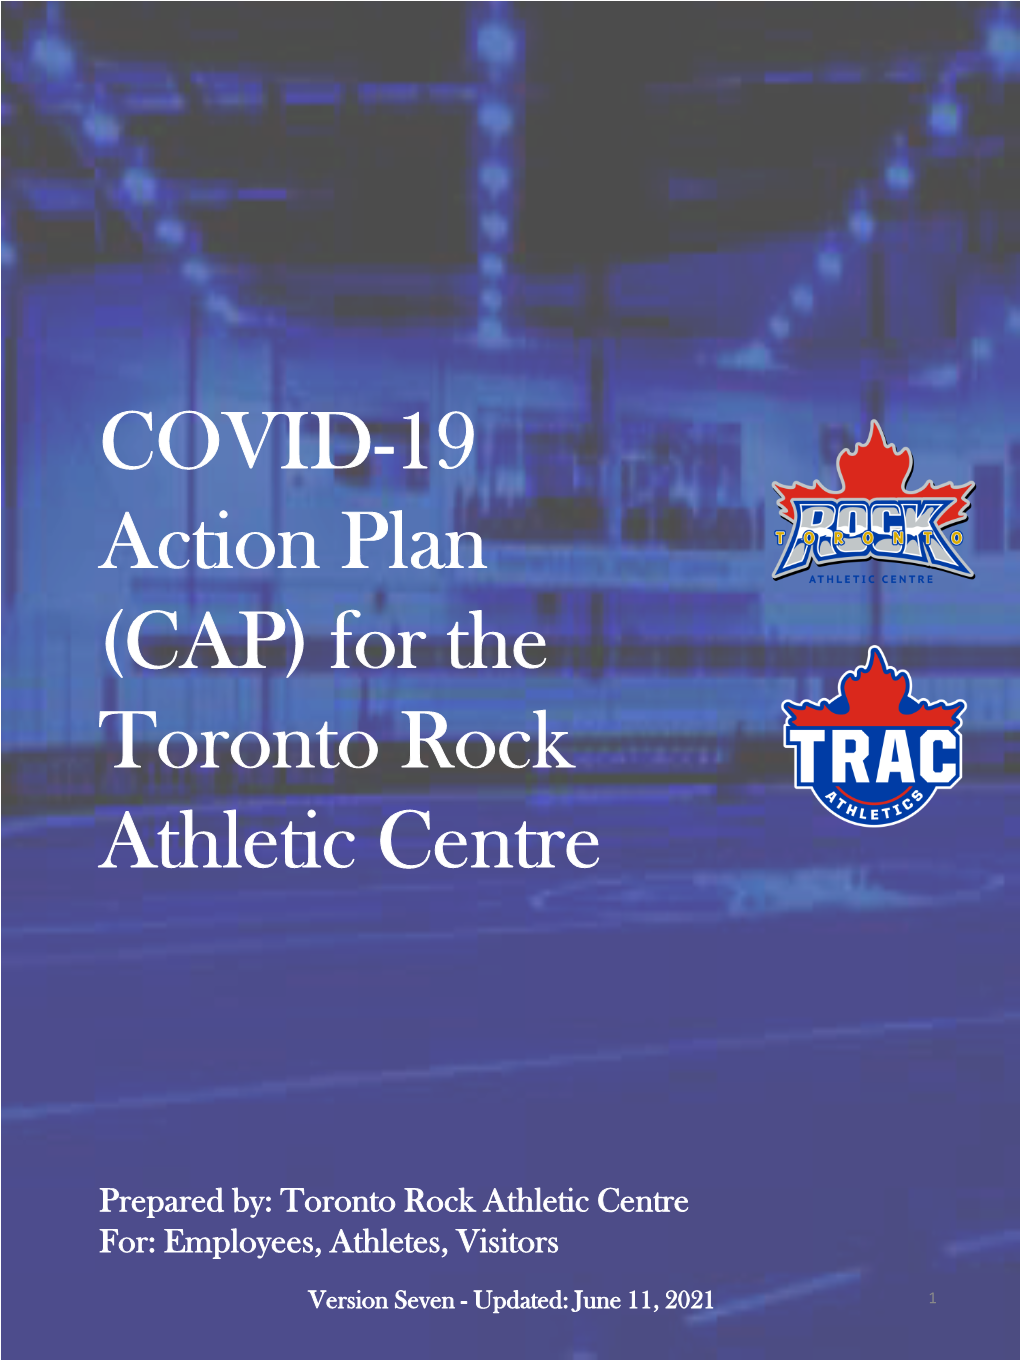 COVID-19 Action Plan (CAP) for the Toronto Rock Athletic Centre